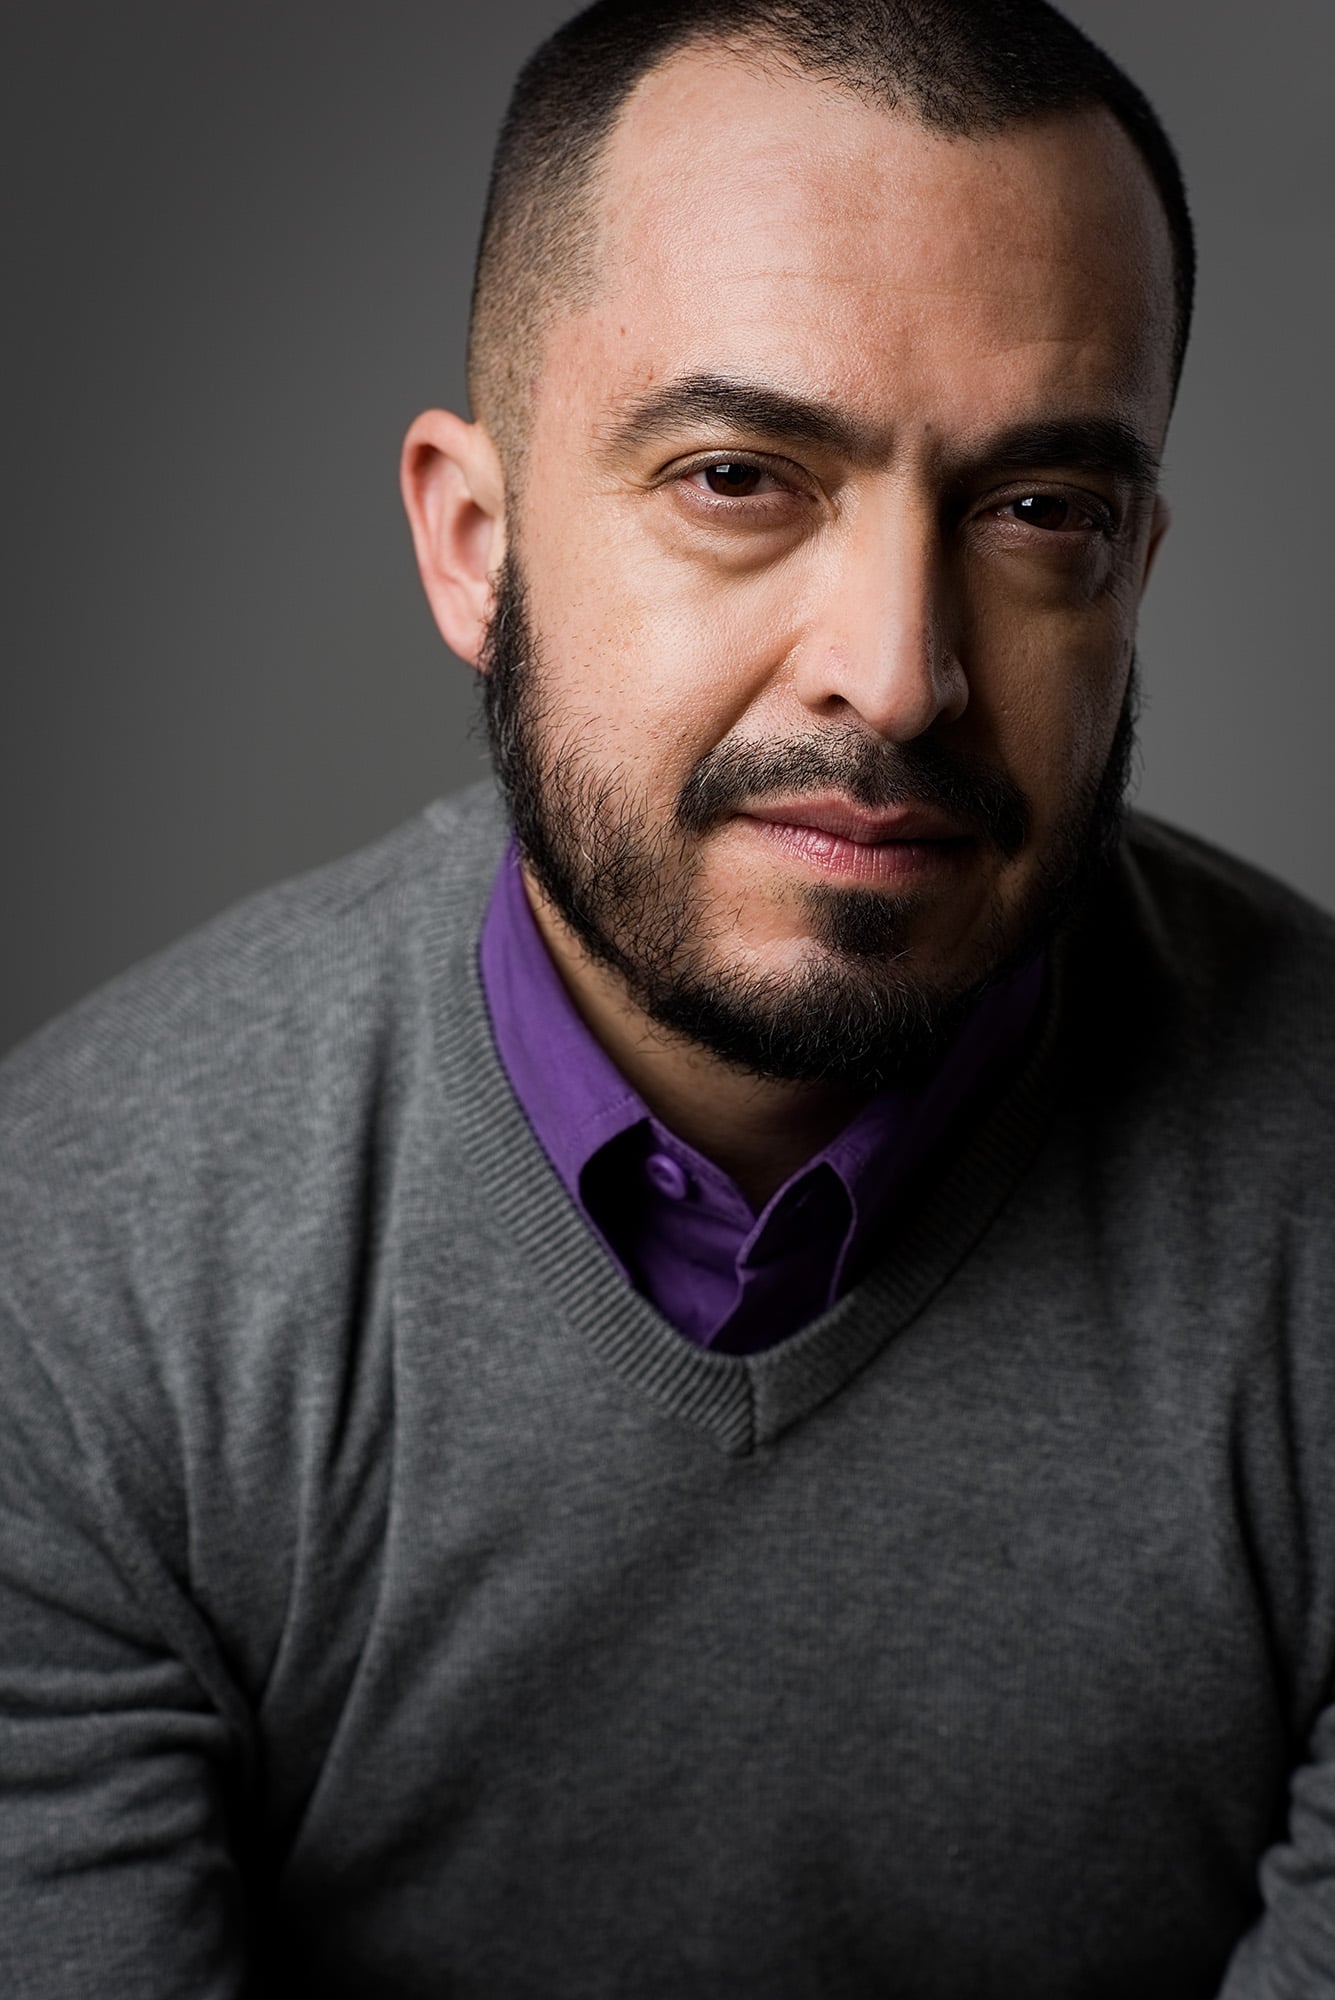 professional headshot of a man in grey sweater and purple undershirt